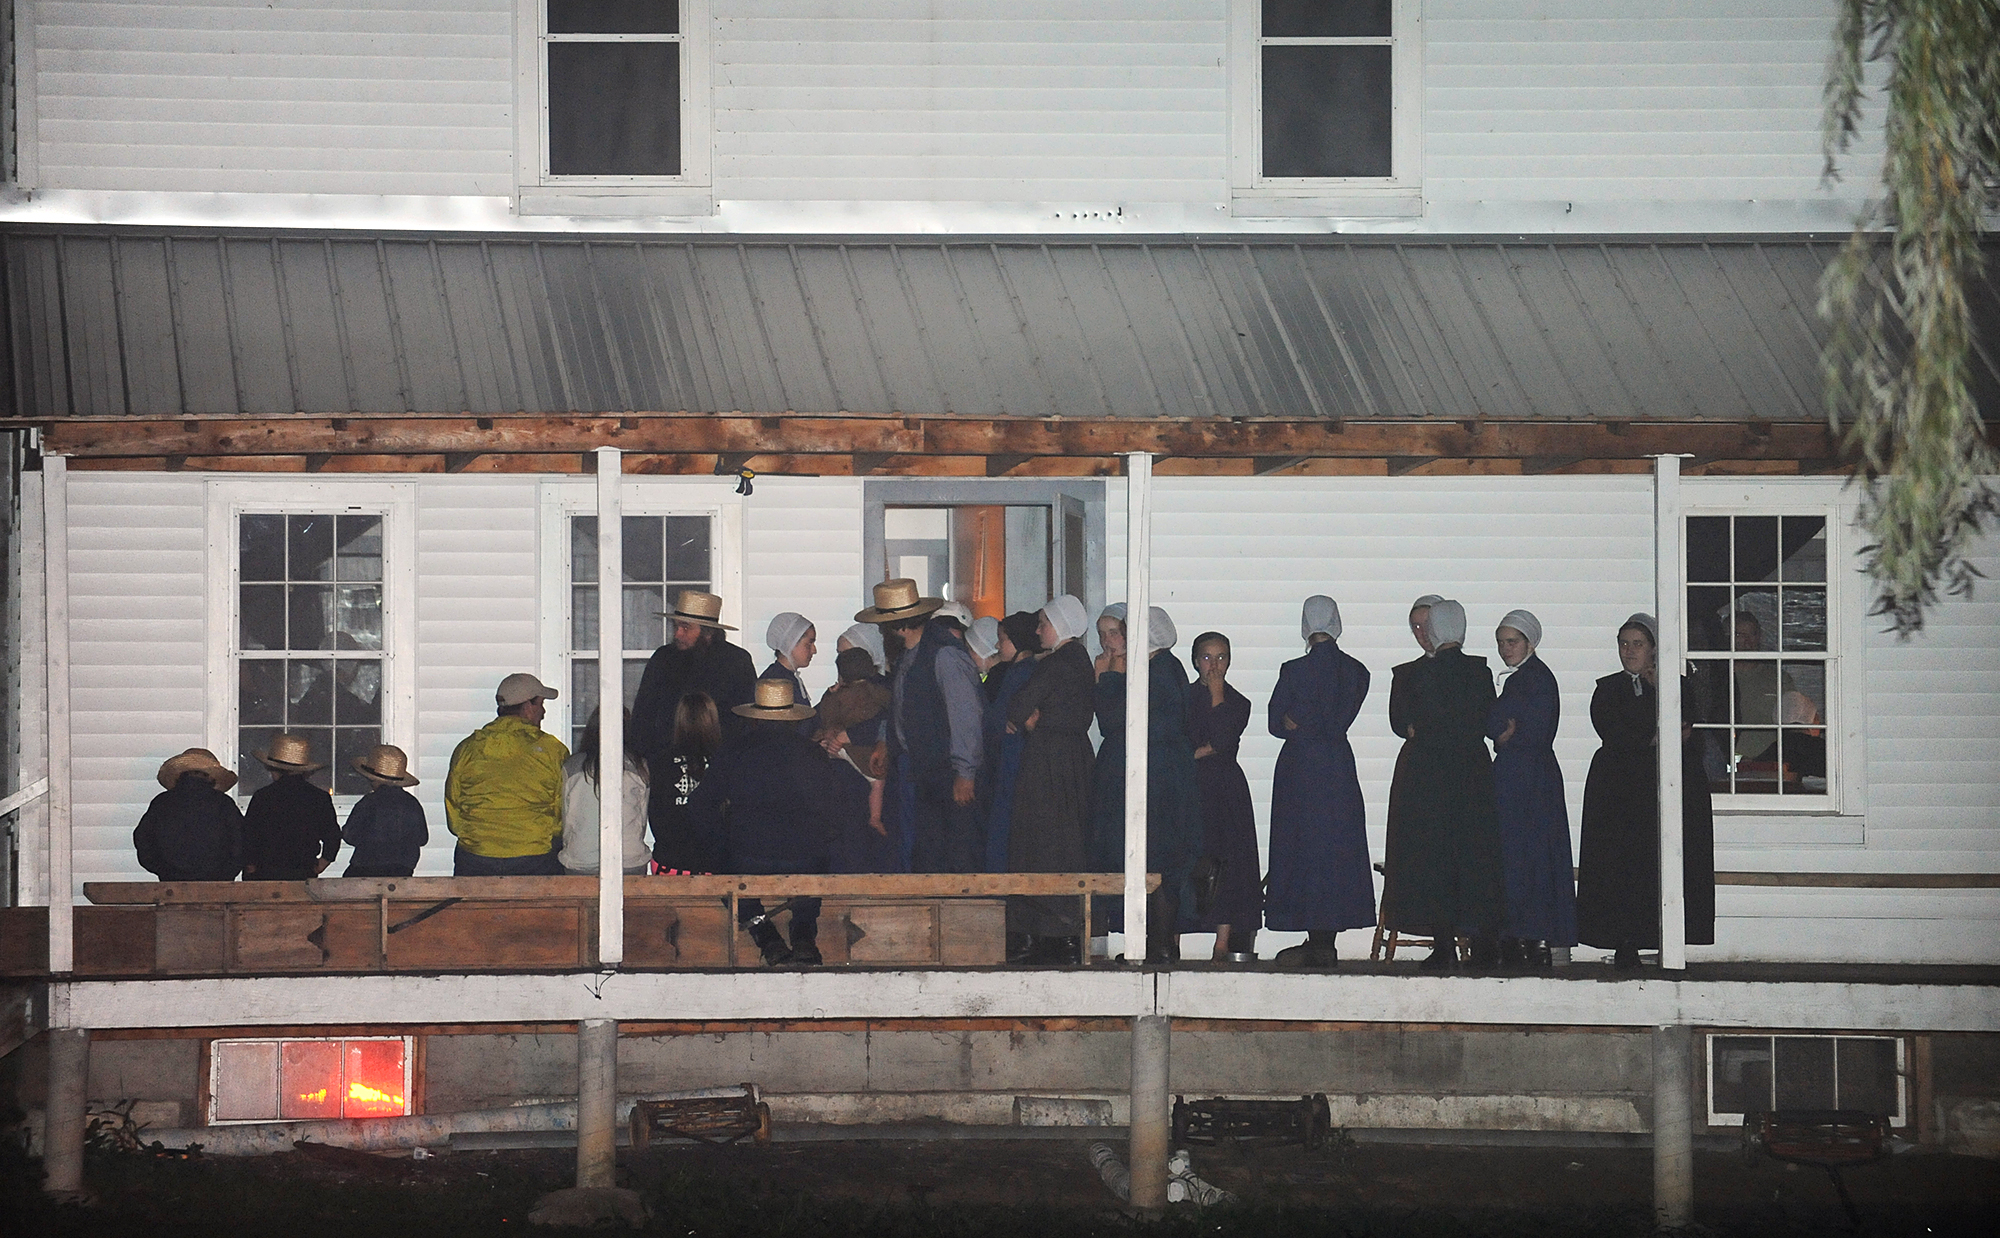 PHOTO: Supporters gather on the porch of a house at the intersection of Route 812 and Mt. Alone Road